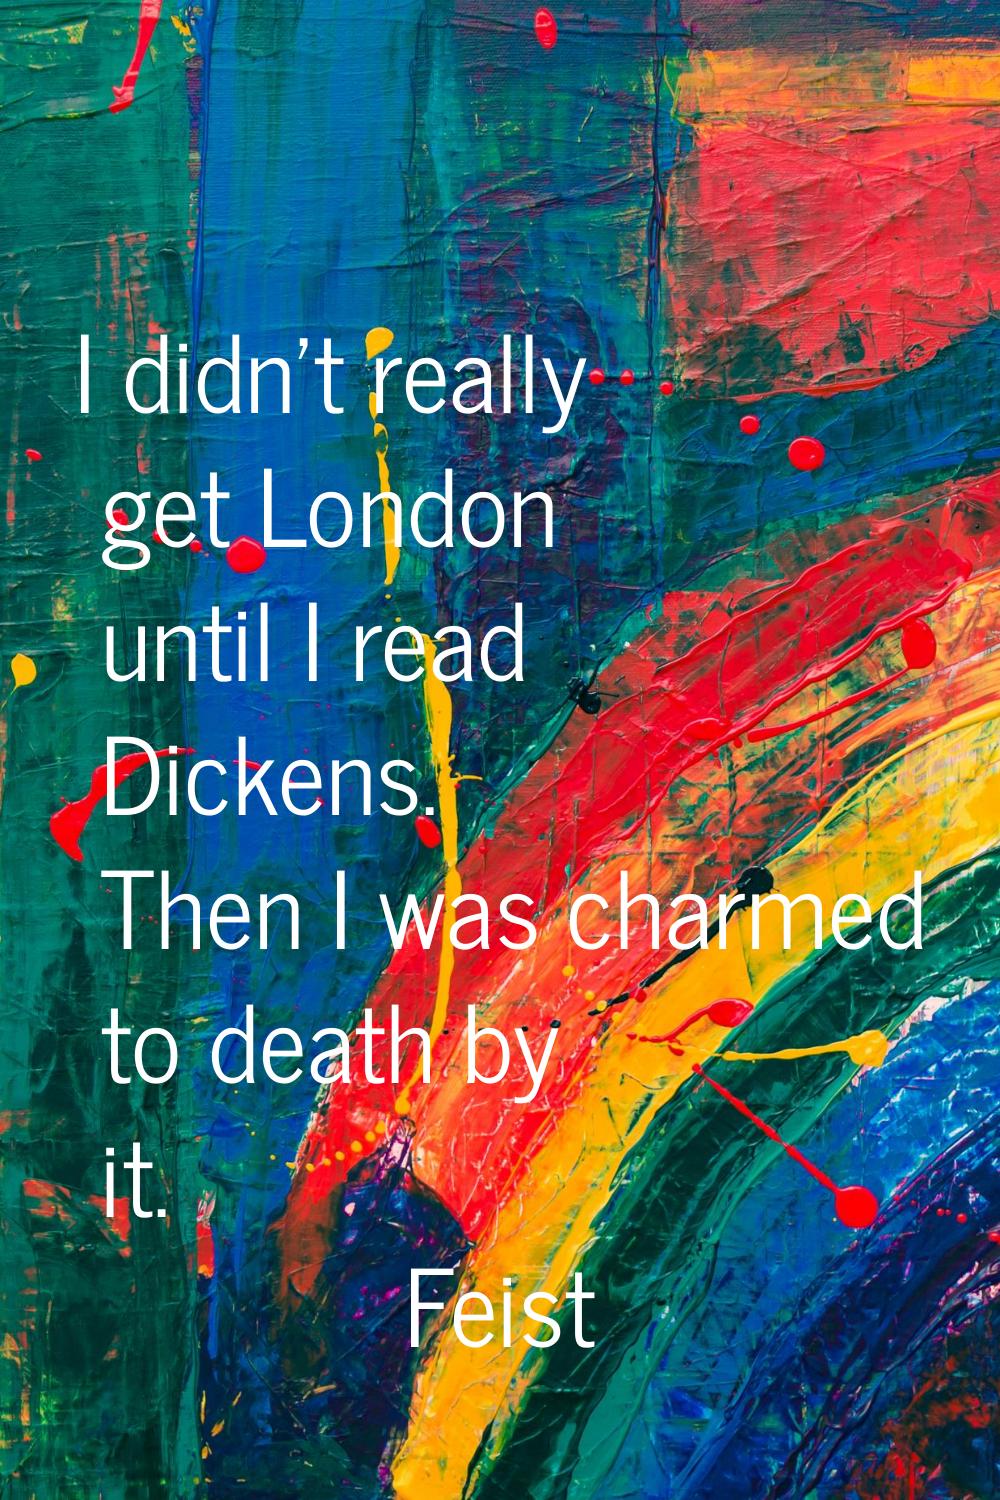 I didn't really get London until I read Dickens. Then I was charmed to death by it.